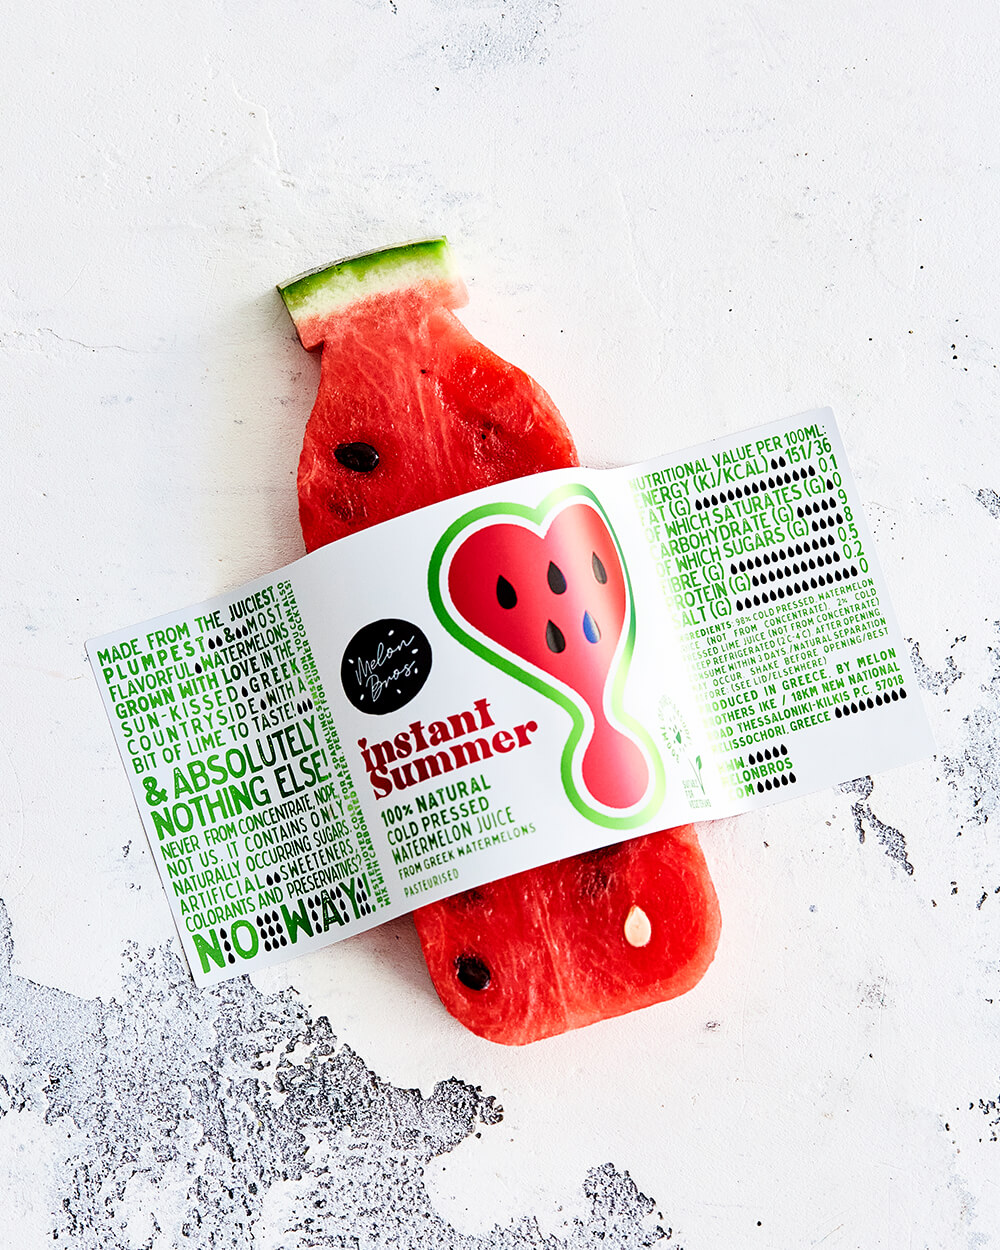 Sophia Georgopoulou Creates That Summer Feeling – All Year Long with Melon Bros Brand and Packaging Design